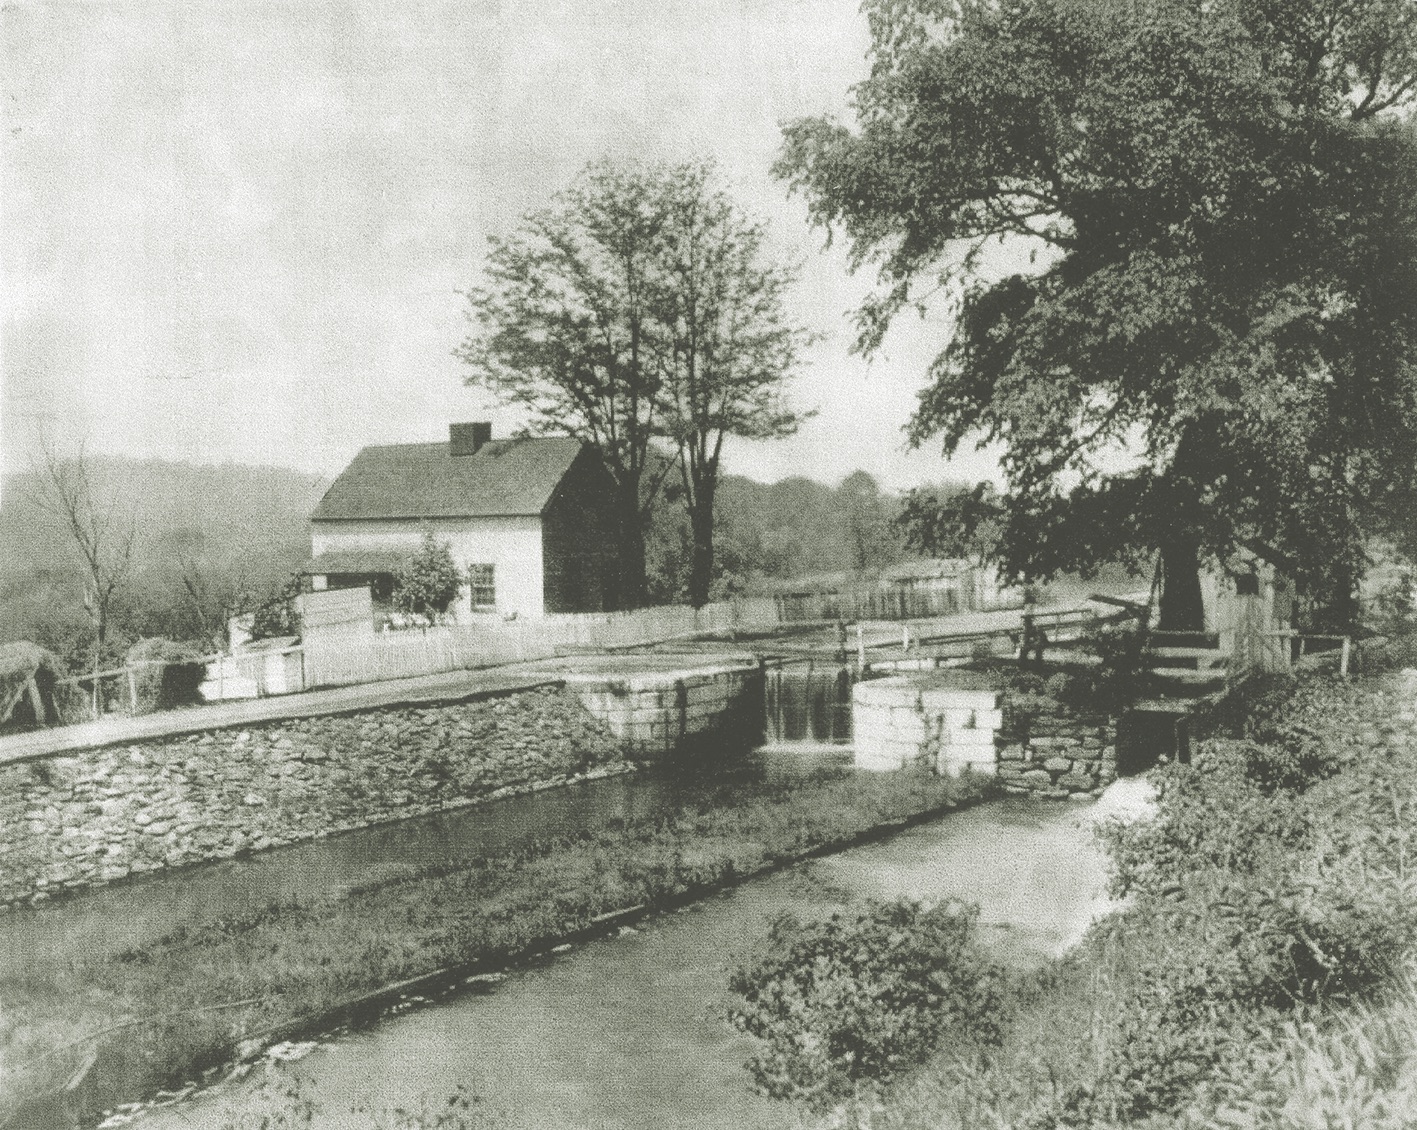 This is a postwar view of Lock 28 and its accompanying lockhouse, but is what the location looked like during the Civil War. Locks were water elevators that raised and lowered boats to meet changes in elevation. (Courtesy of the C&O Canal Trust)